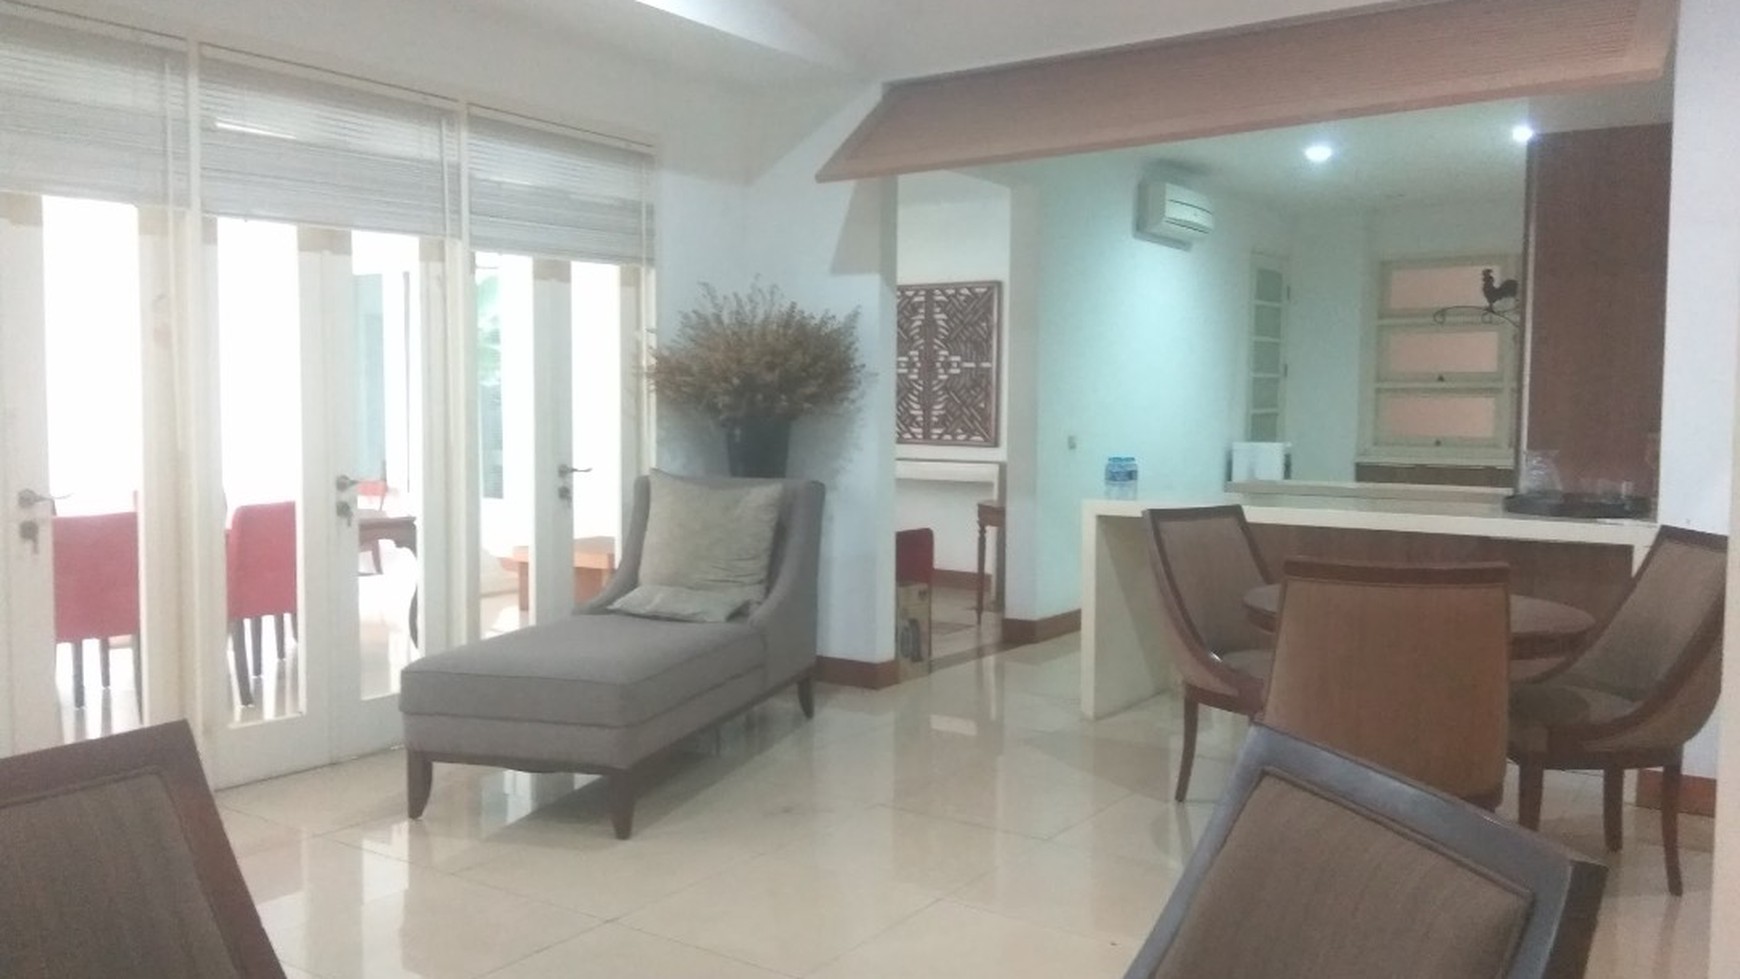 Comfortable house and nice house in menteng area "the price can be negotiable '